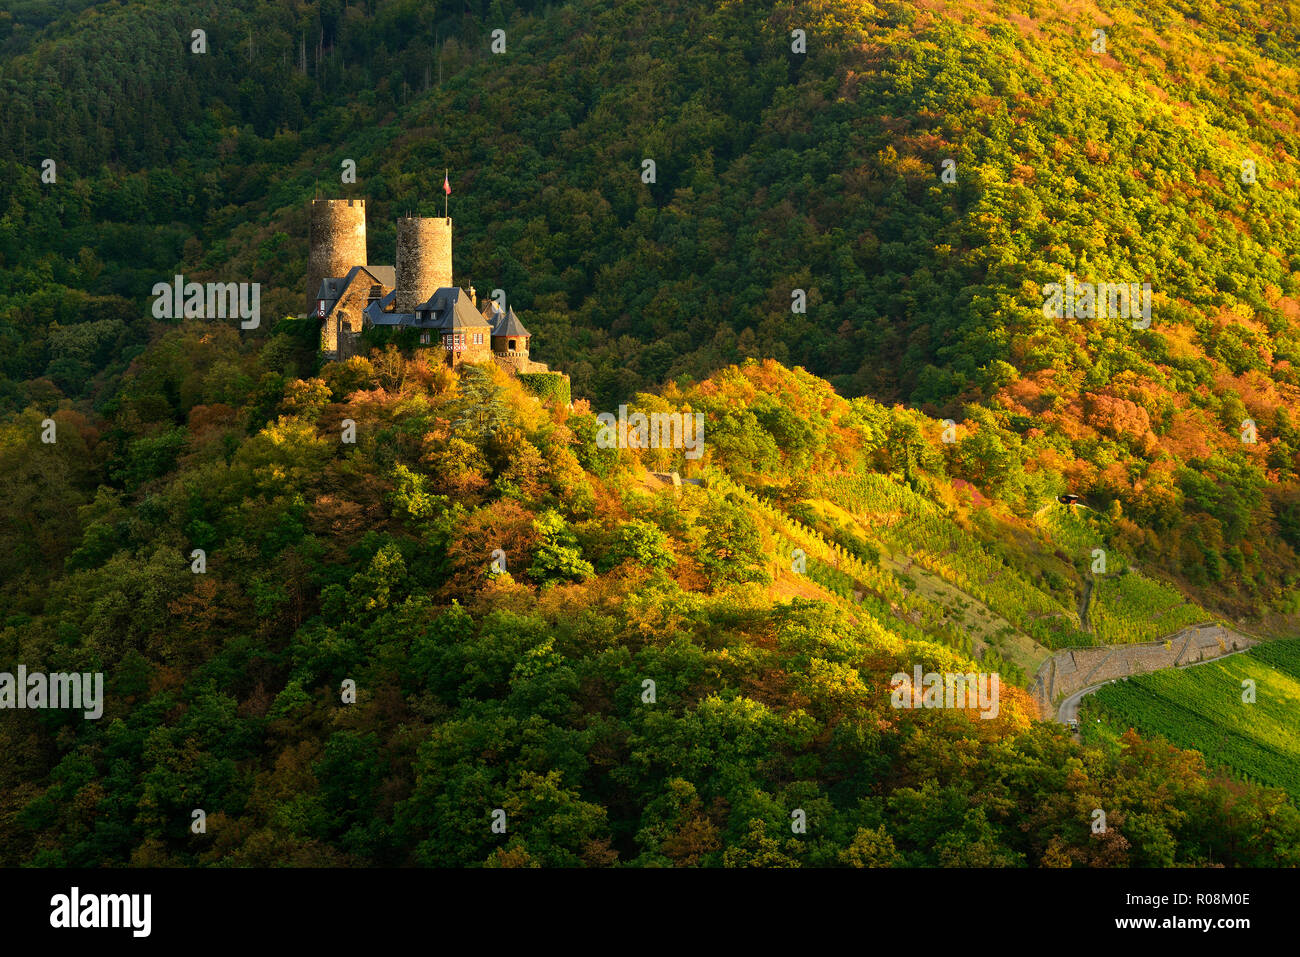 Thurant Castle surrounded by woods and vineyards in autumn, evening light, Alken, Lower Mosel, Rhineland-Palatinate, Germany Stock Photo